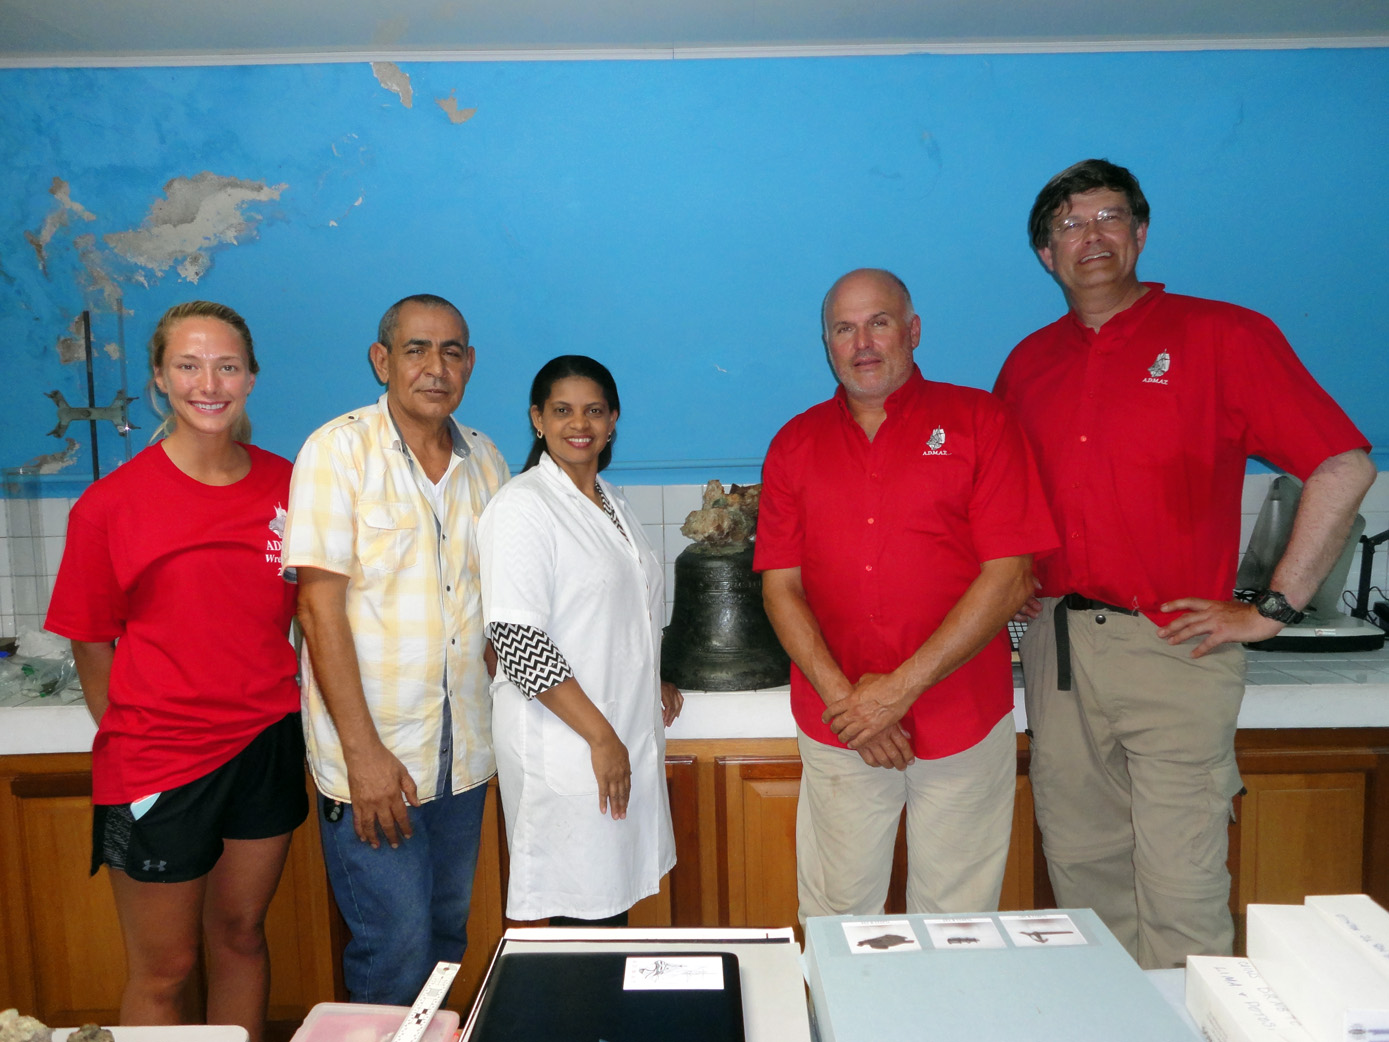  Student archaeologist Justine Fite, Director Francis Soto ONPCS, Chief Conservator Isabel Brito ONPCS, Project Leader Raimund Krob and Dr Simon Spooner, at the ONPCS working on artefacts in 2017 